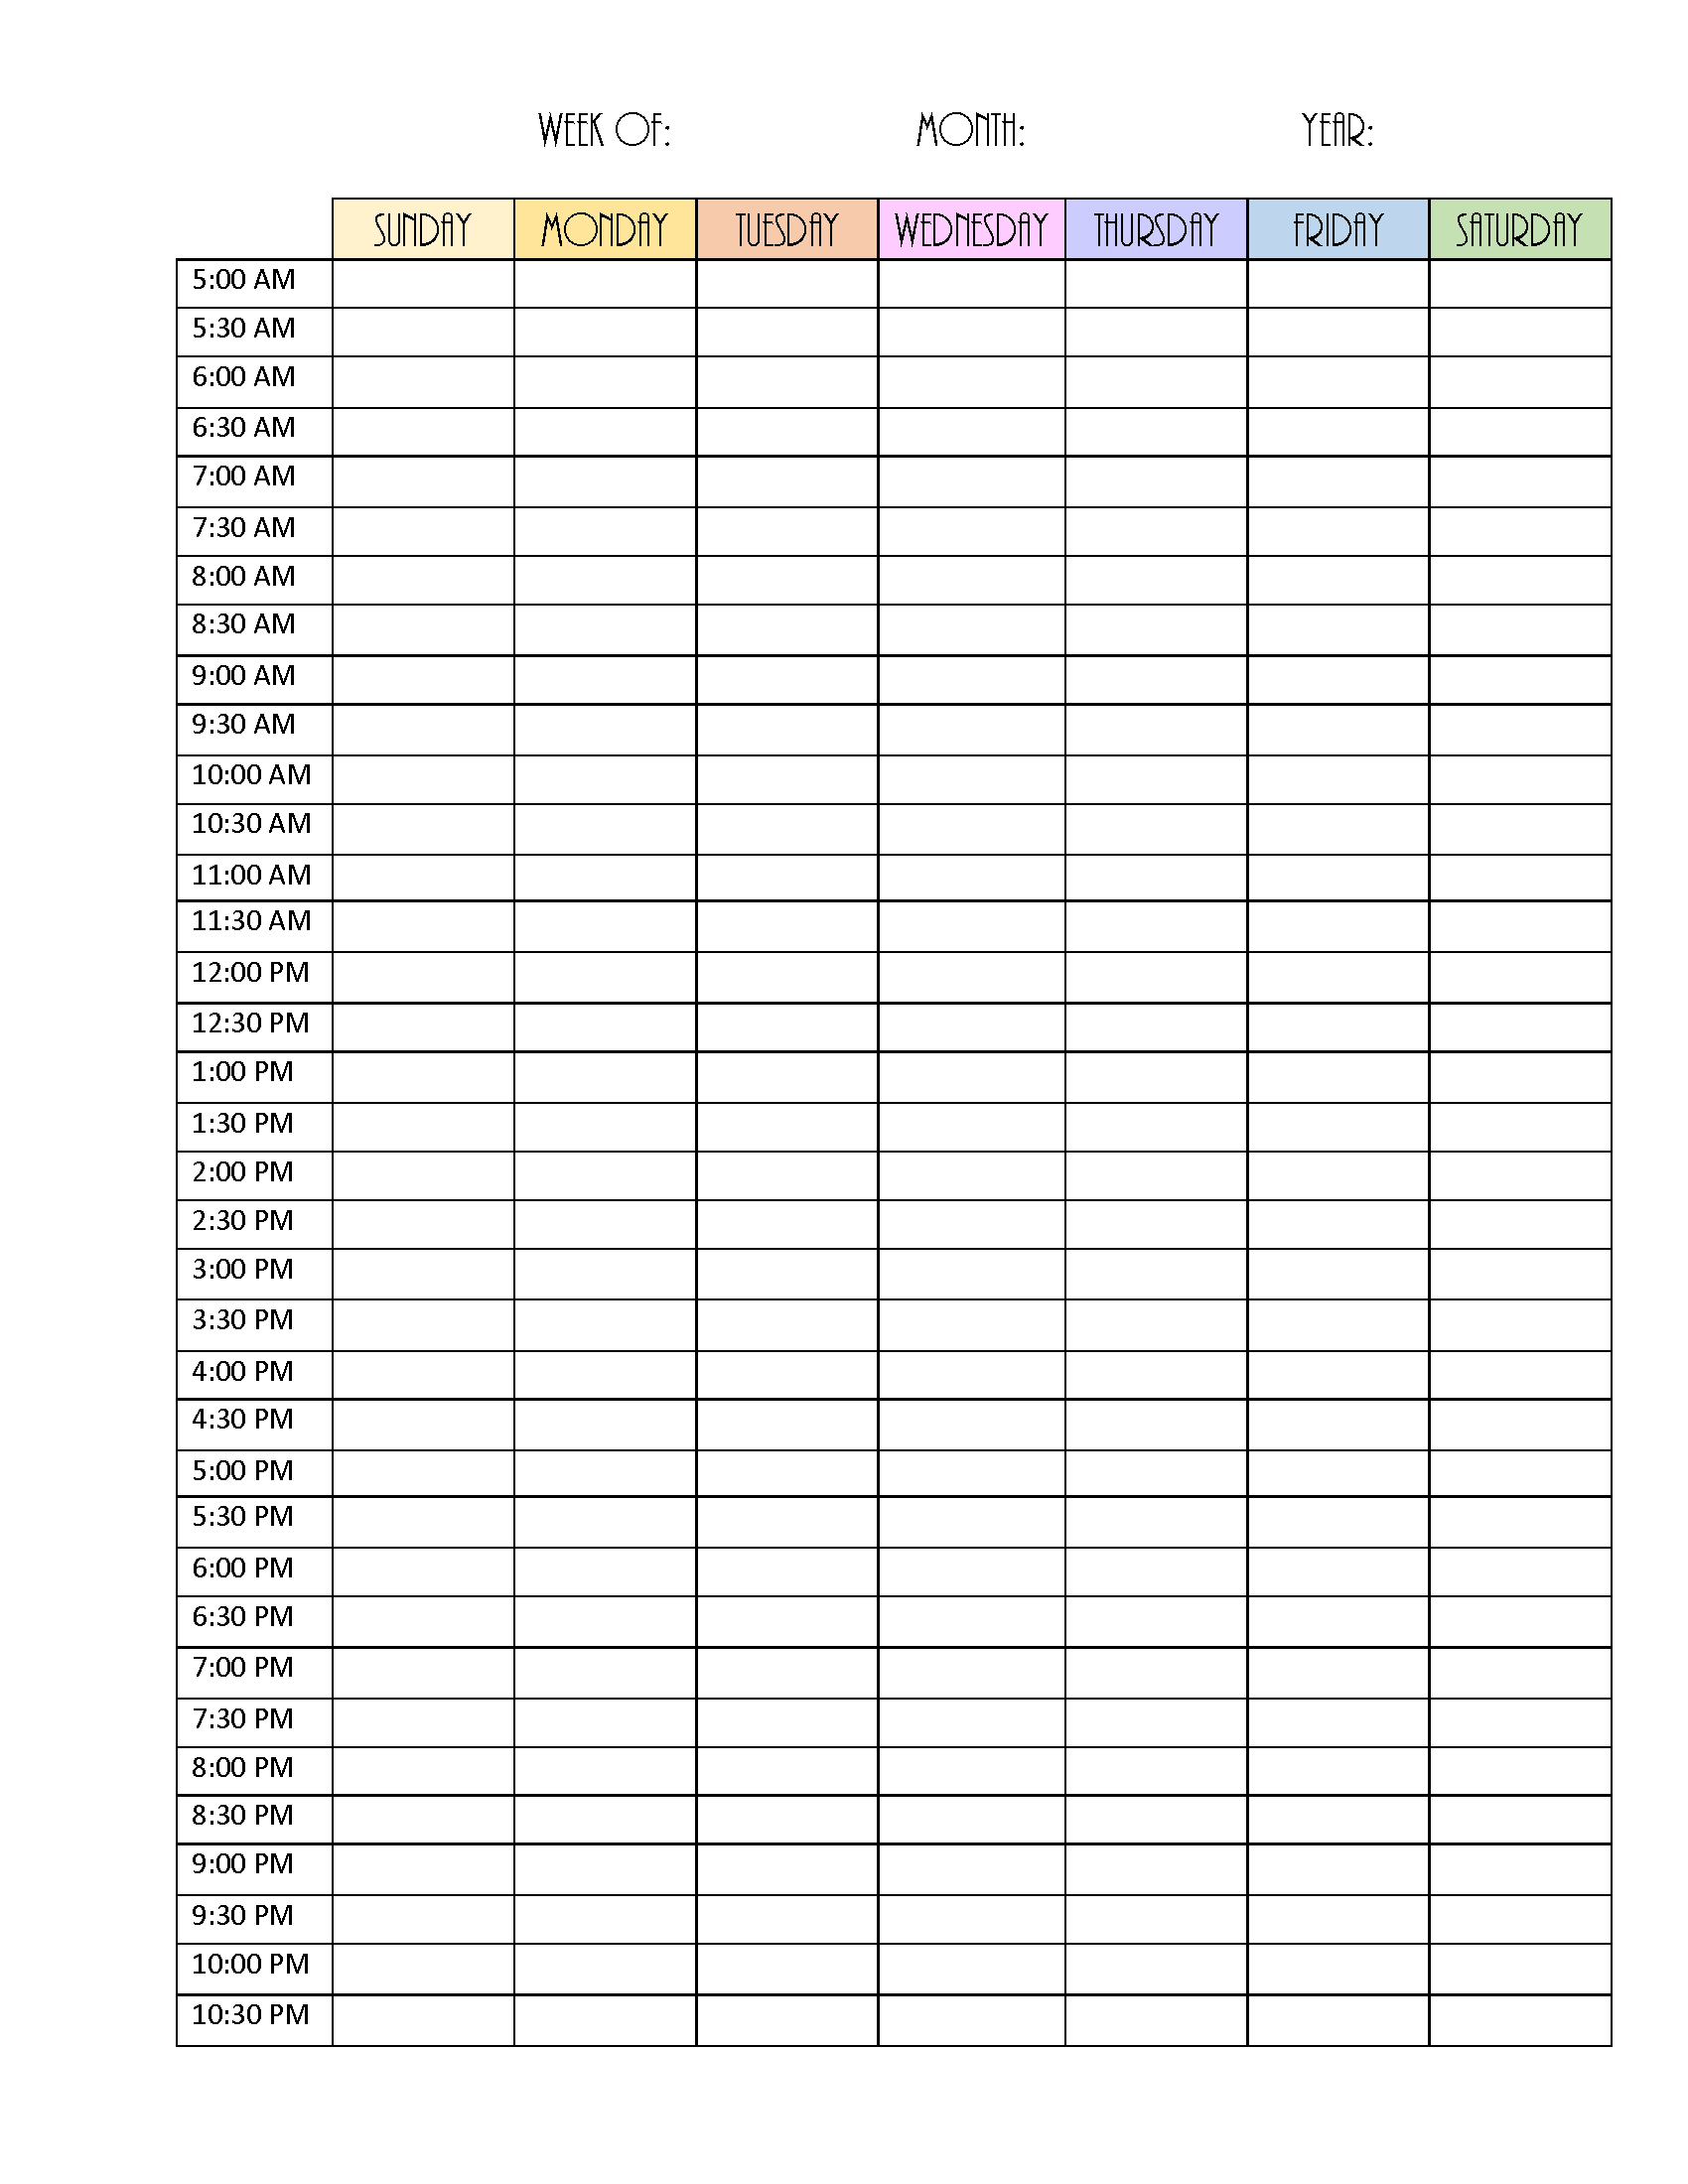 4 week calendar template with enterable date 43